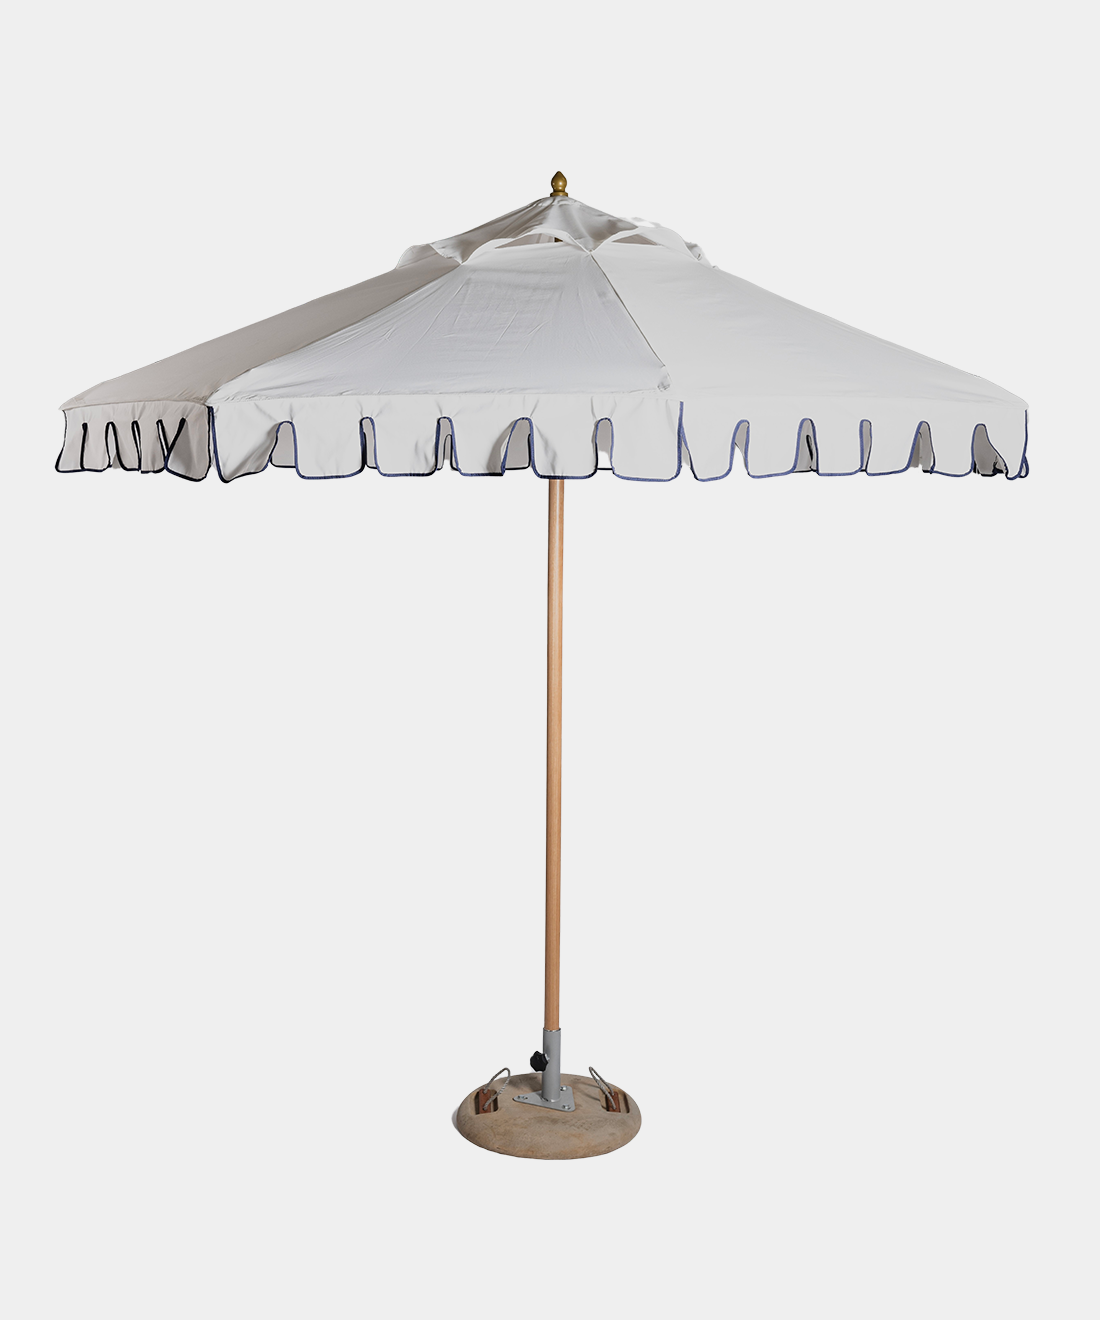 Scalloped Parasol with Navy Trim in Ecru